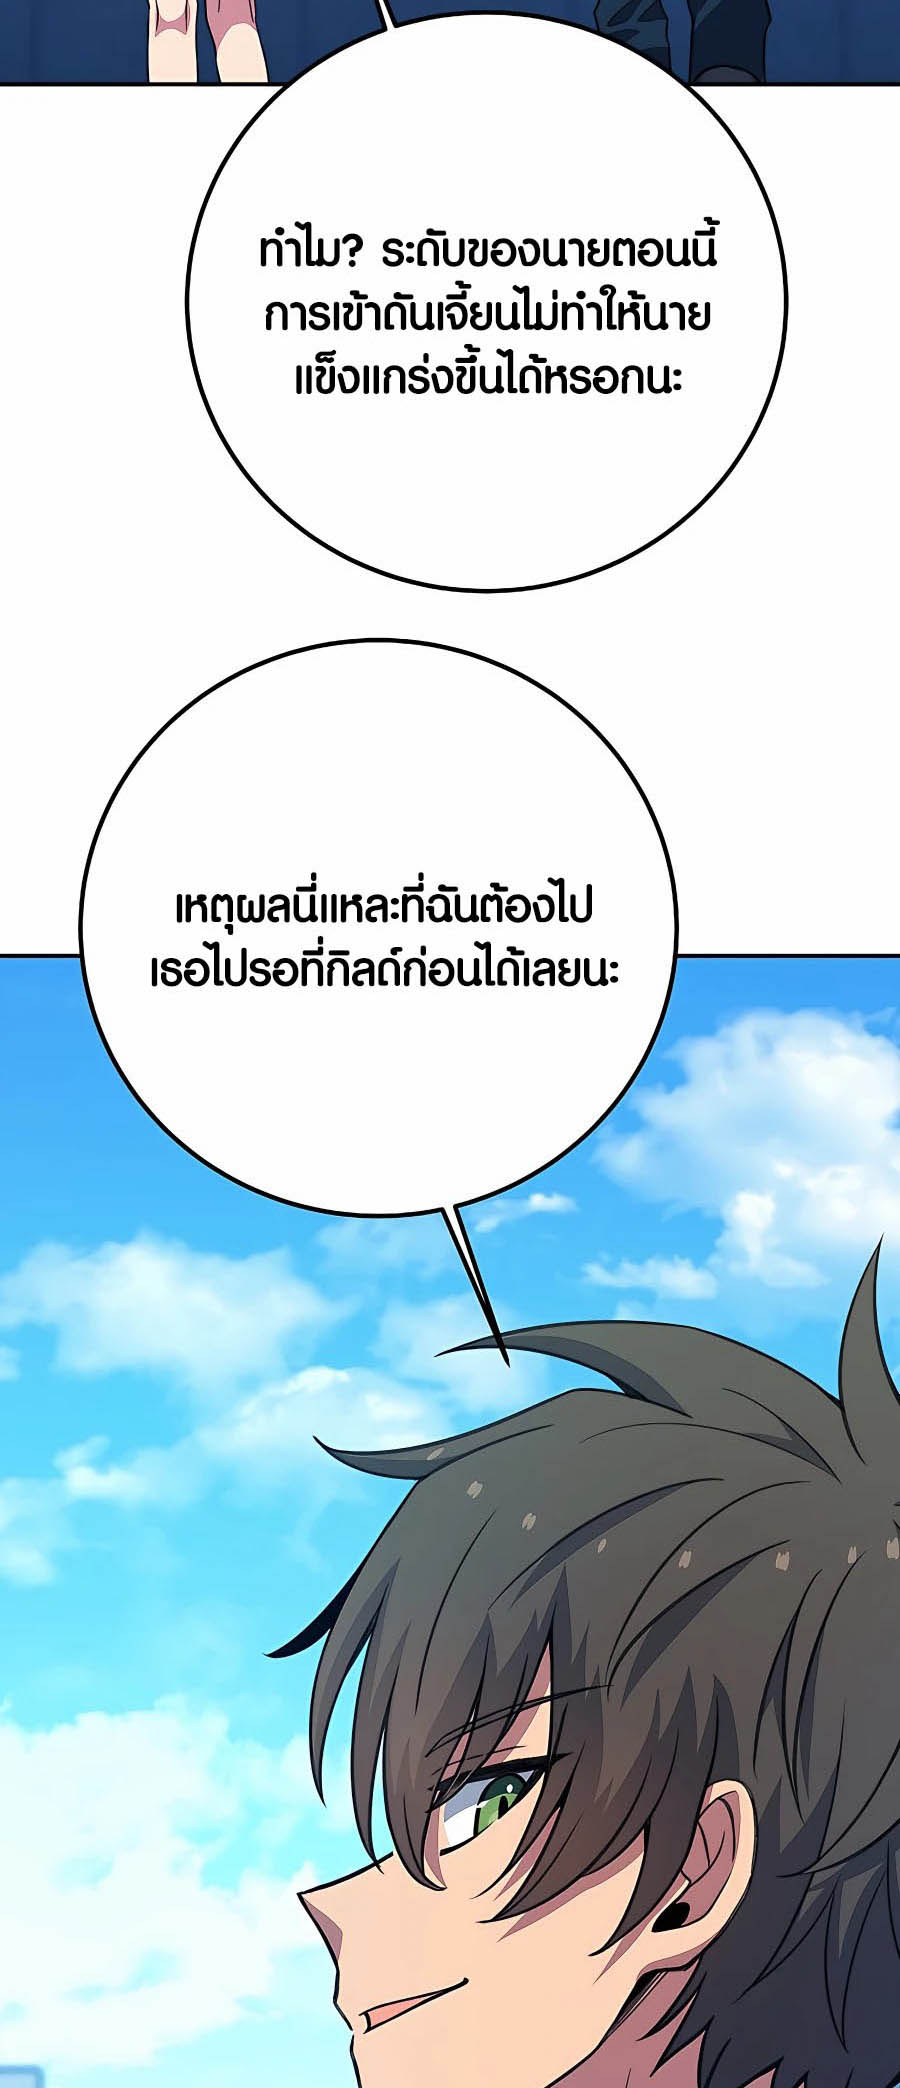 à¸­à¹ˆà¸²à¸™à¸¡à¸±à¸™à¸®à¸§à¸² à¹€à¸£à¸·à¹ˆà¸­à¸‡ The Part Time Land of the Gods 56 51